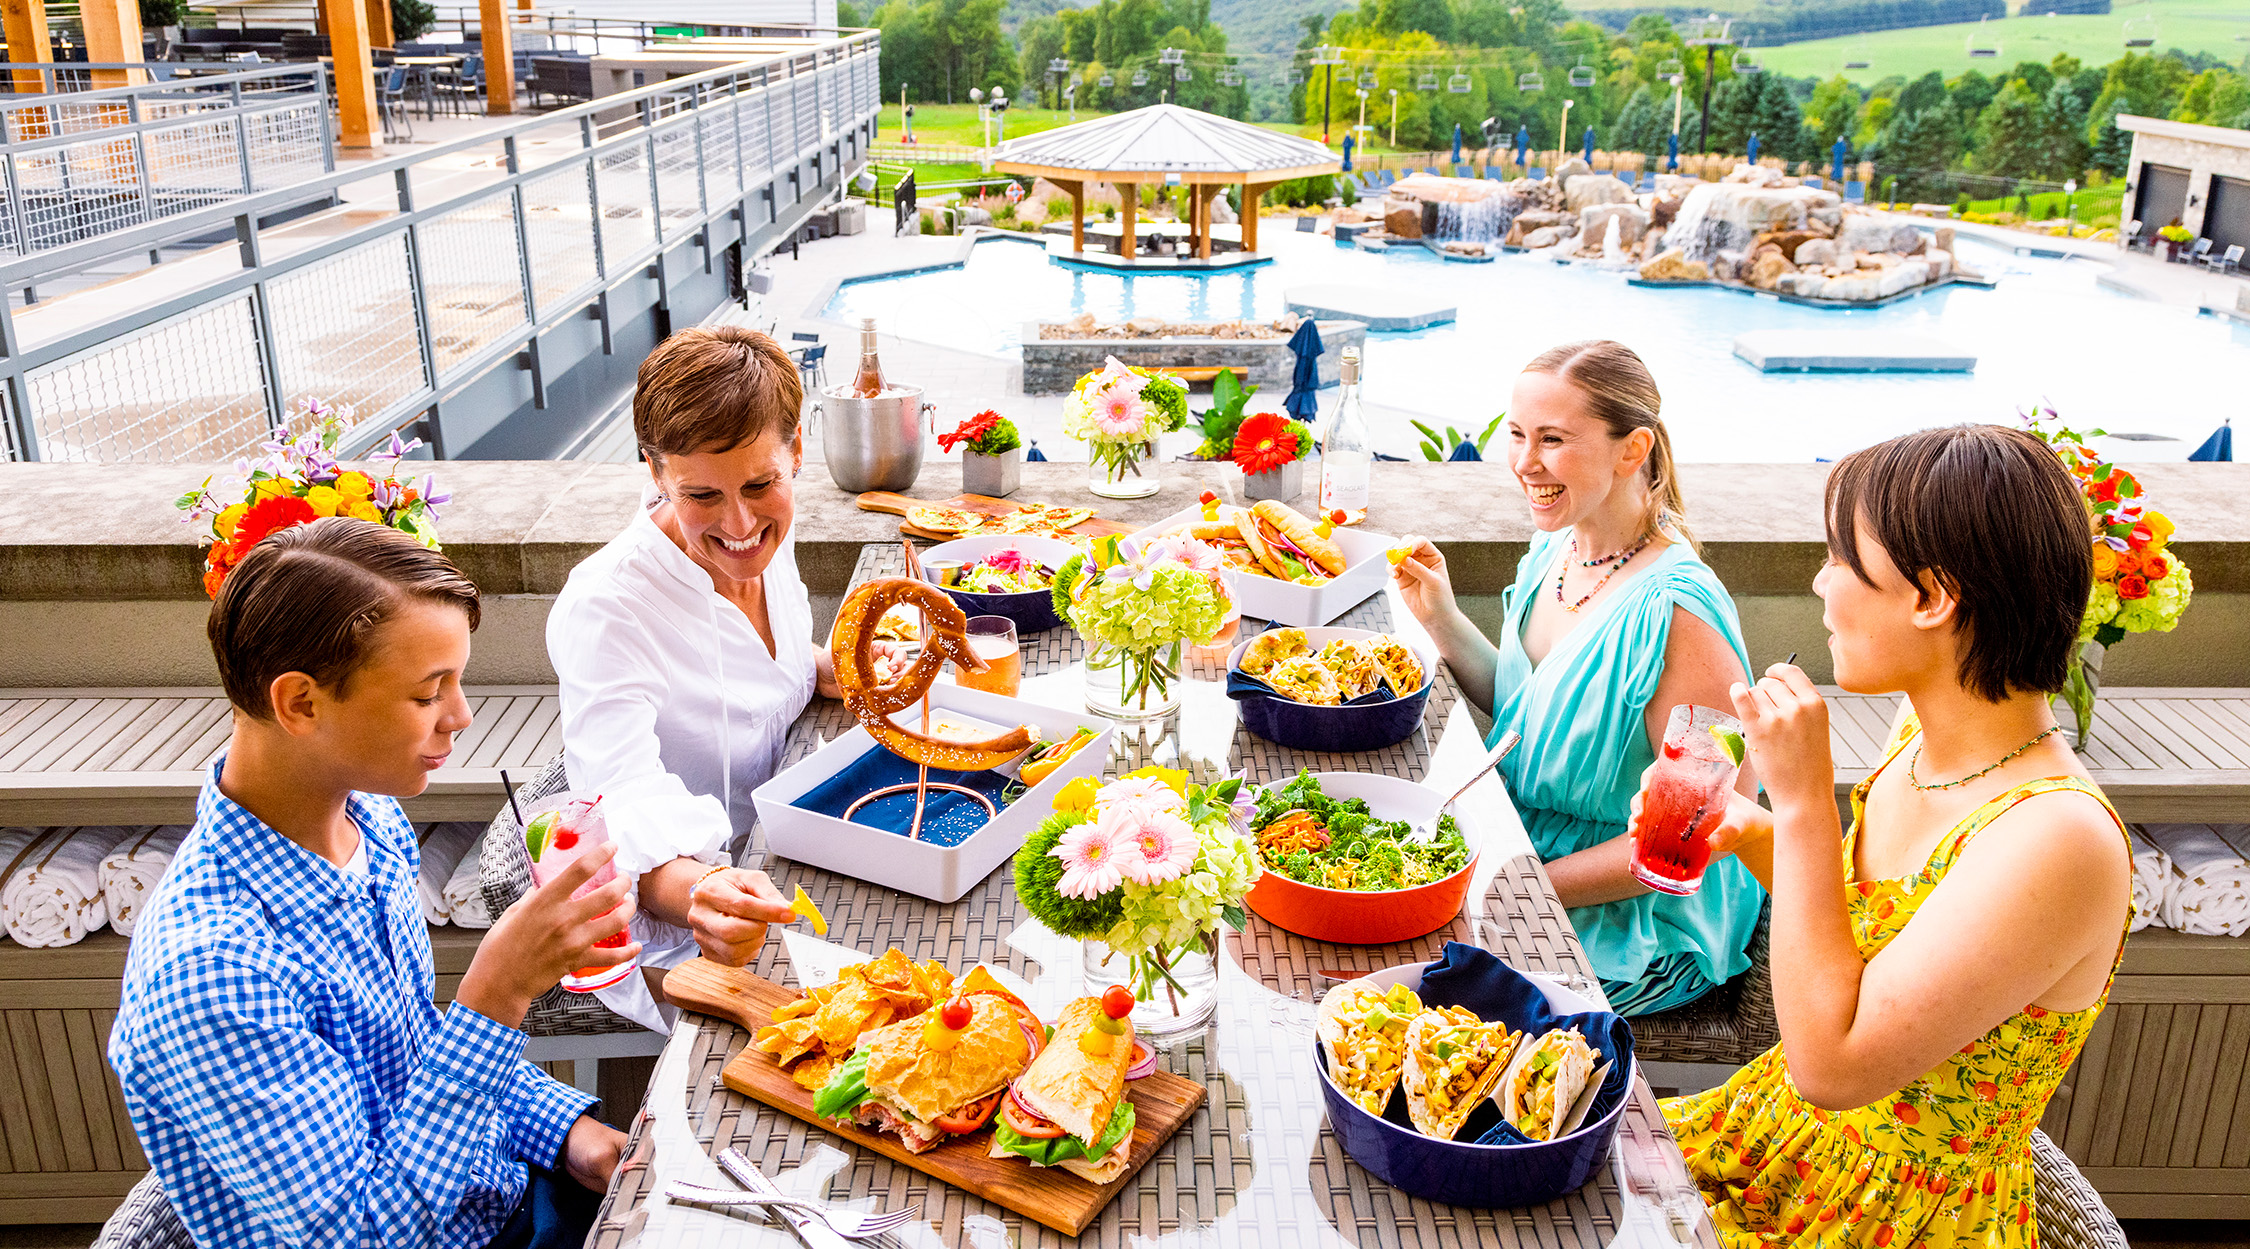 A family of four enjoying an outdoor meal overlooking the pool at The Peak restaurant at Nemacolin resort.